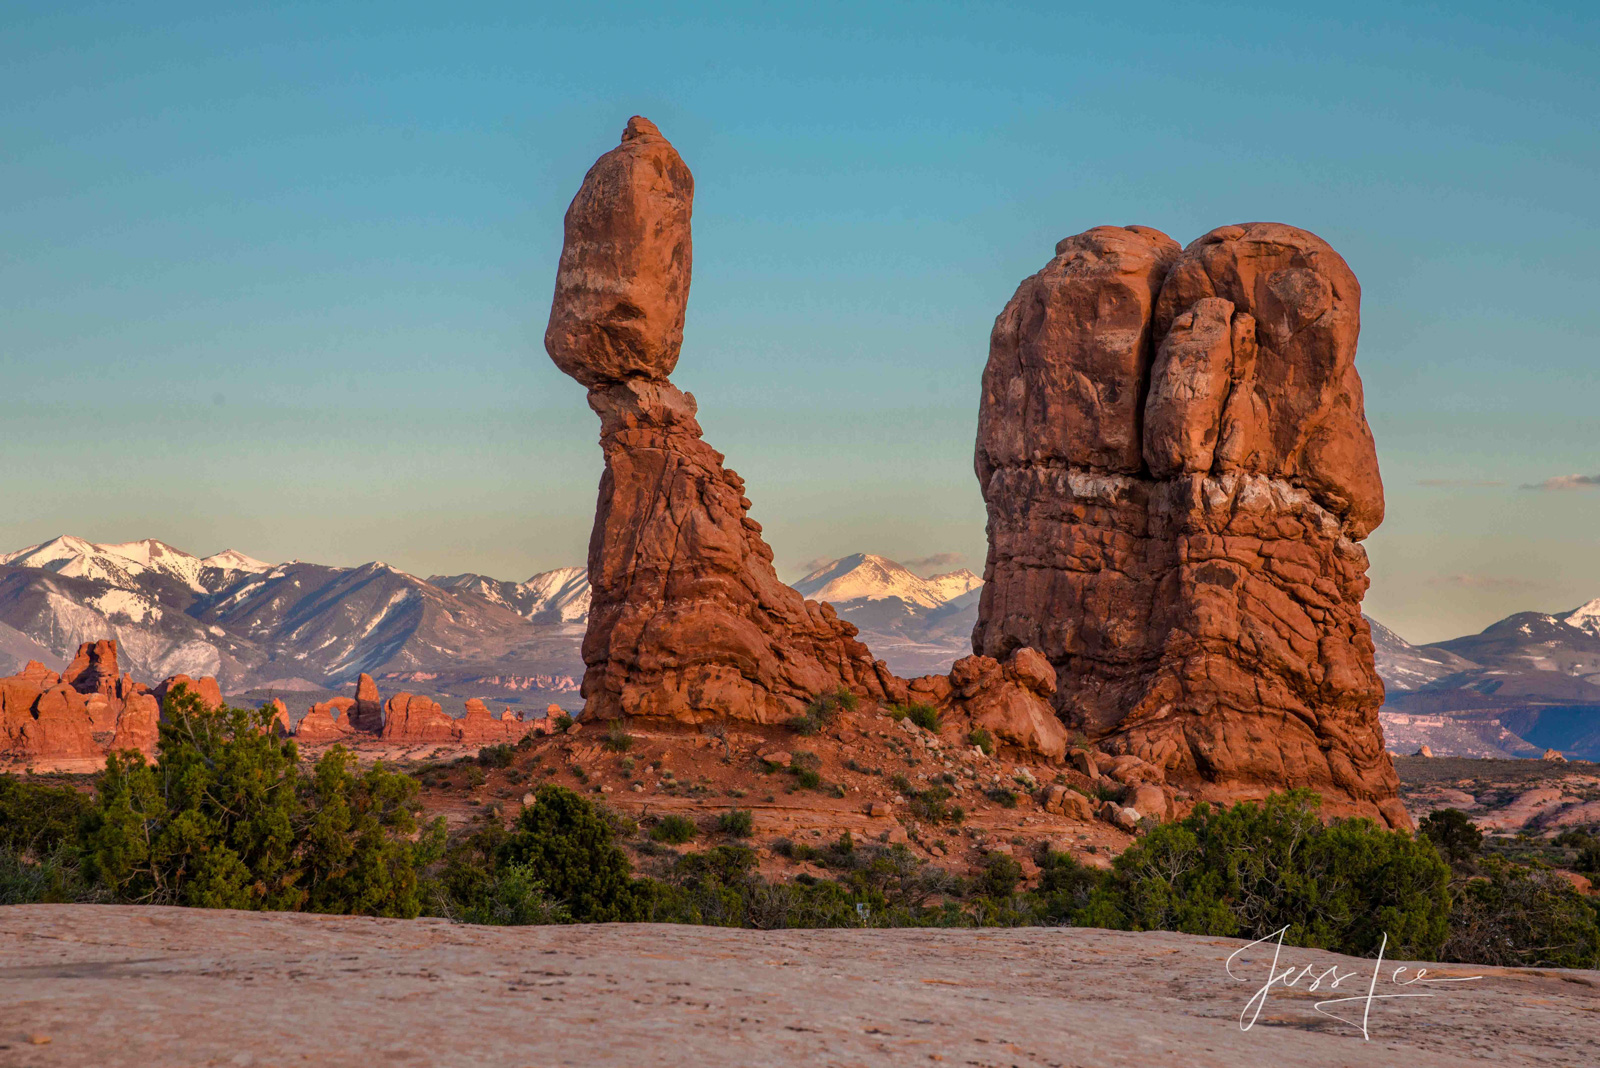 FINE ART LIMITED EDITION  PHOTO PRINT OF BALANCE ROCK, ARCHES NATIONAL PARK Balance Rock in Arches. A photo print of Utah Landscape...